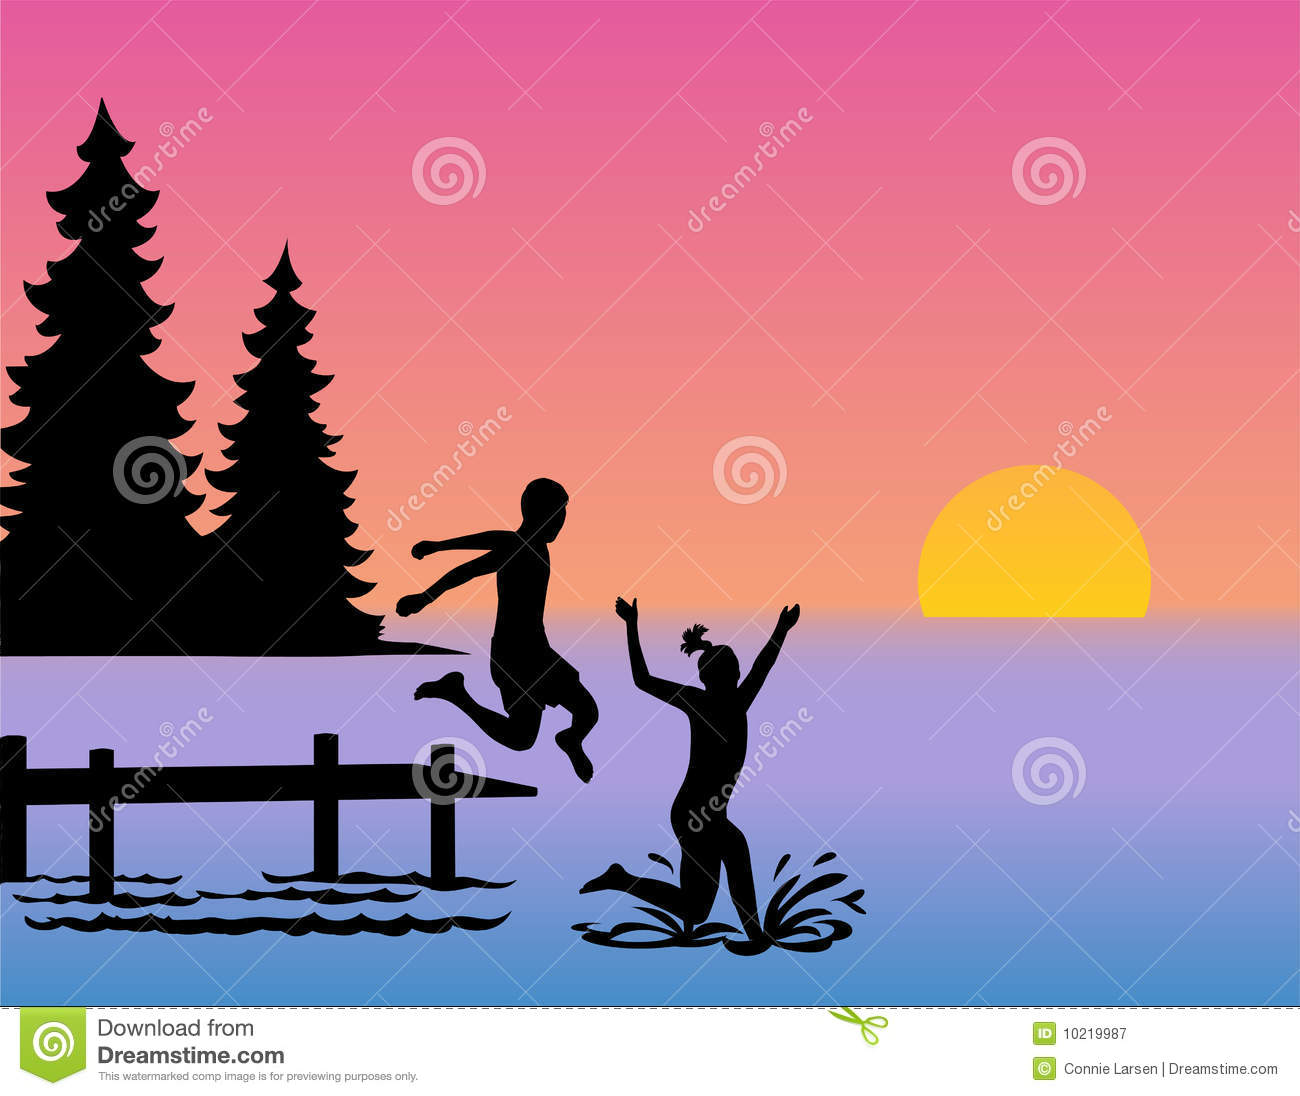 Children Jumping Into Lake Eps Royalty Free Stock Photography   Image